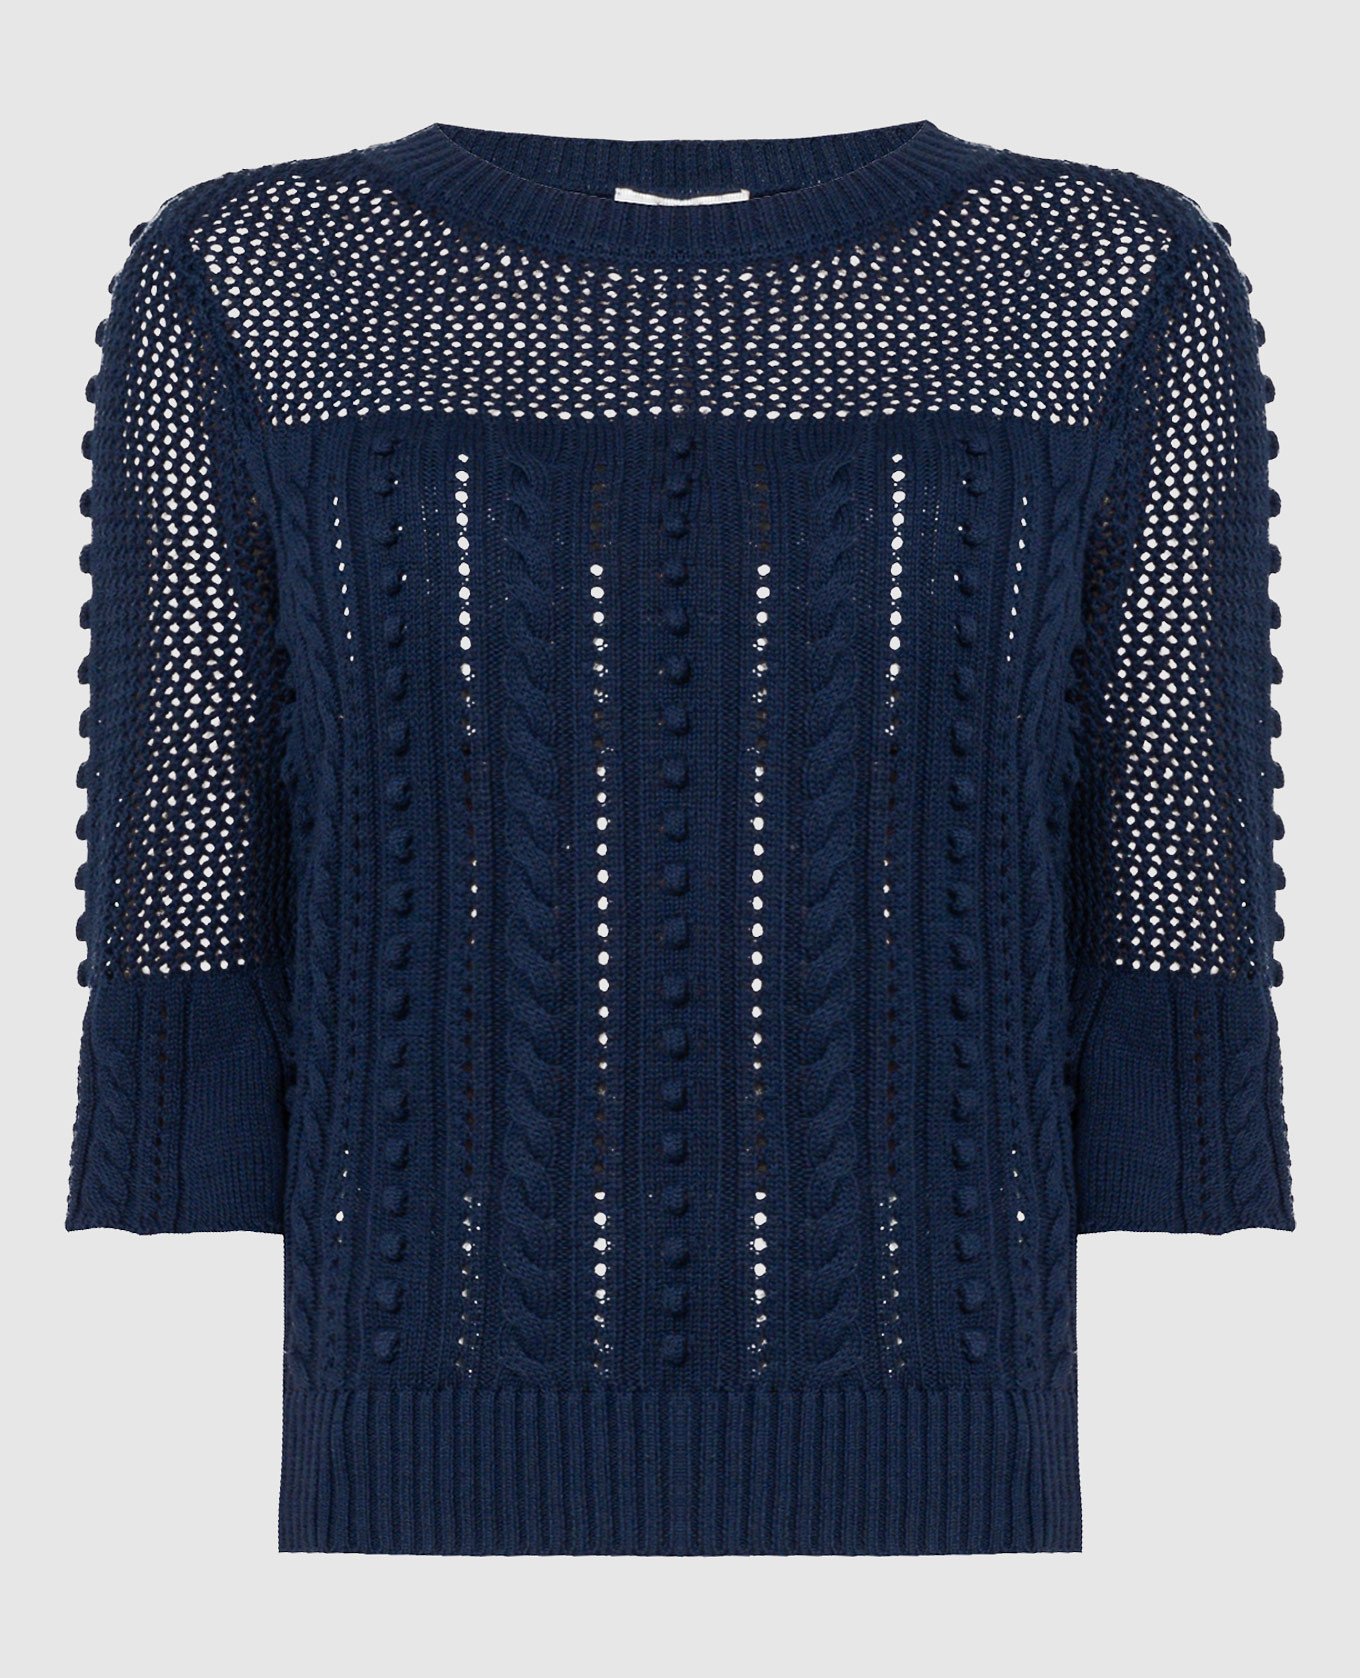 Blue jumper with a textured pattern